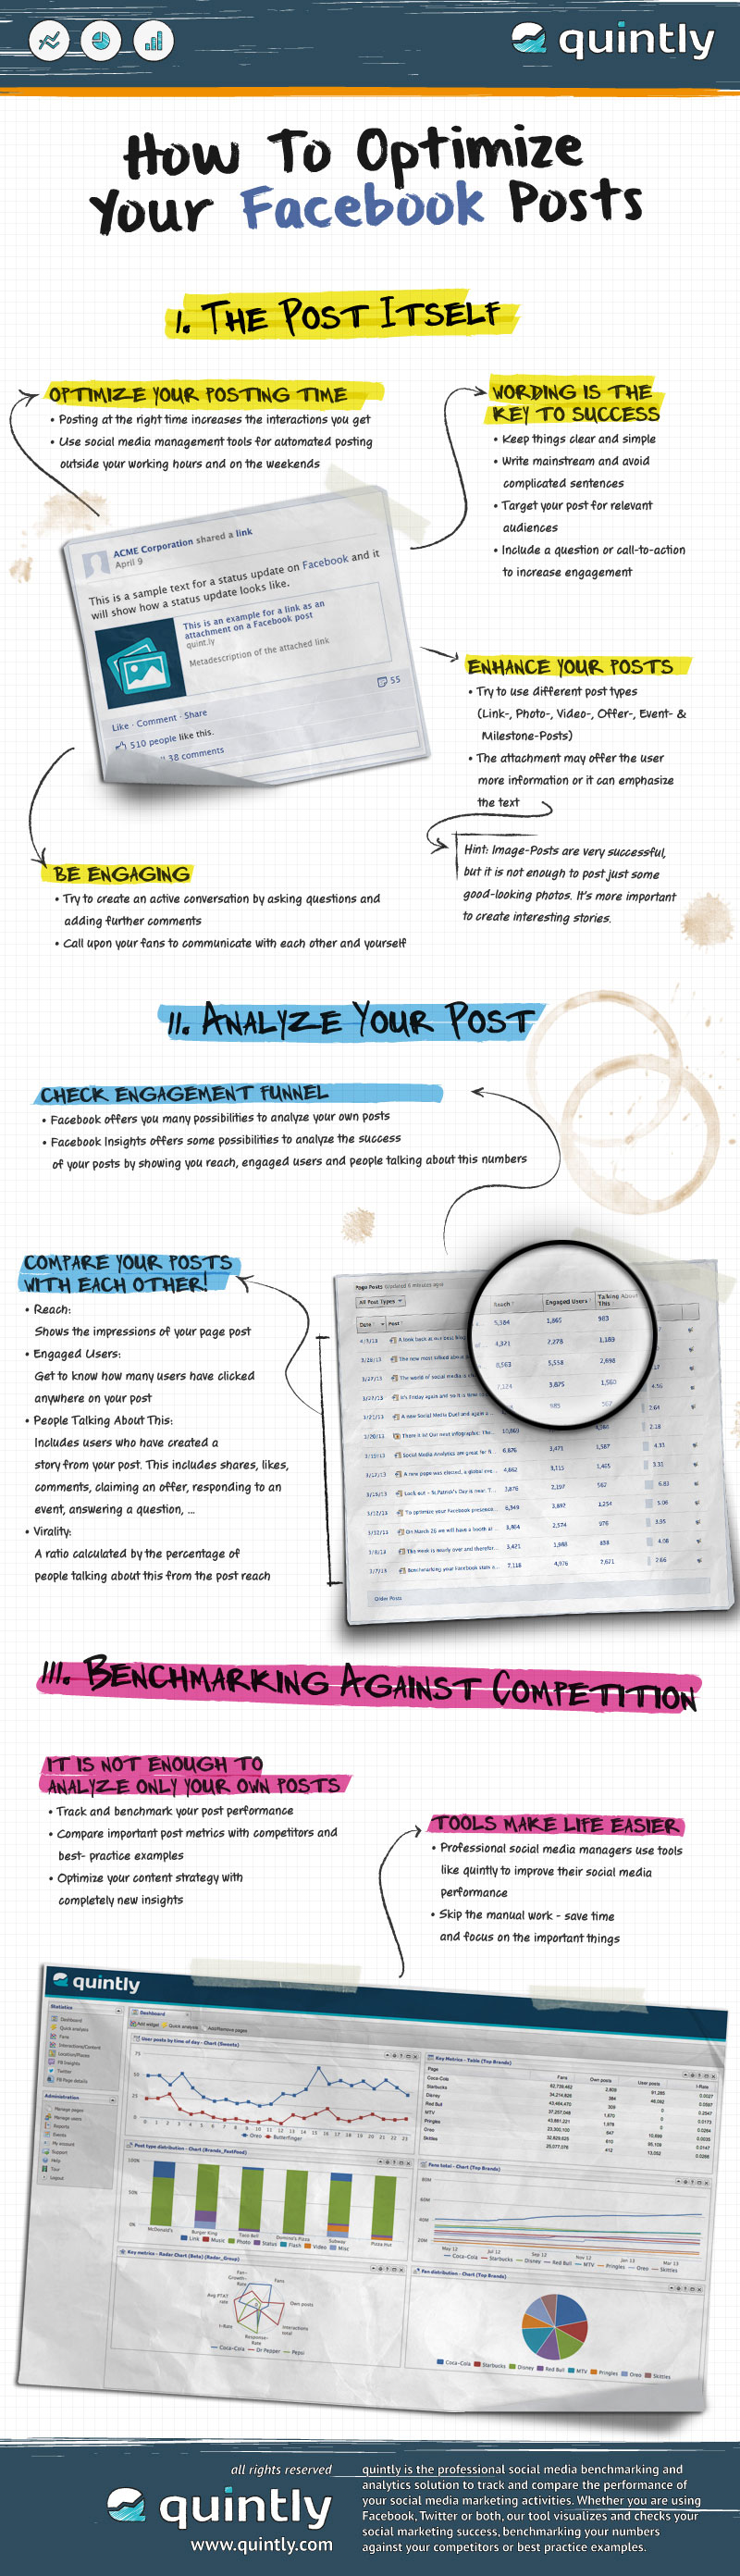 A Simple Guide For Optimizing Your Facebook Posts [Infographic]